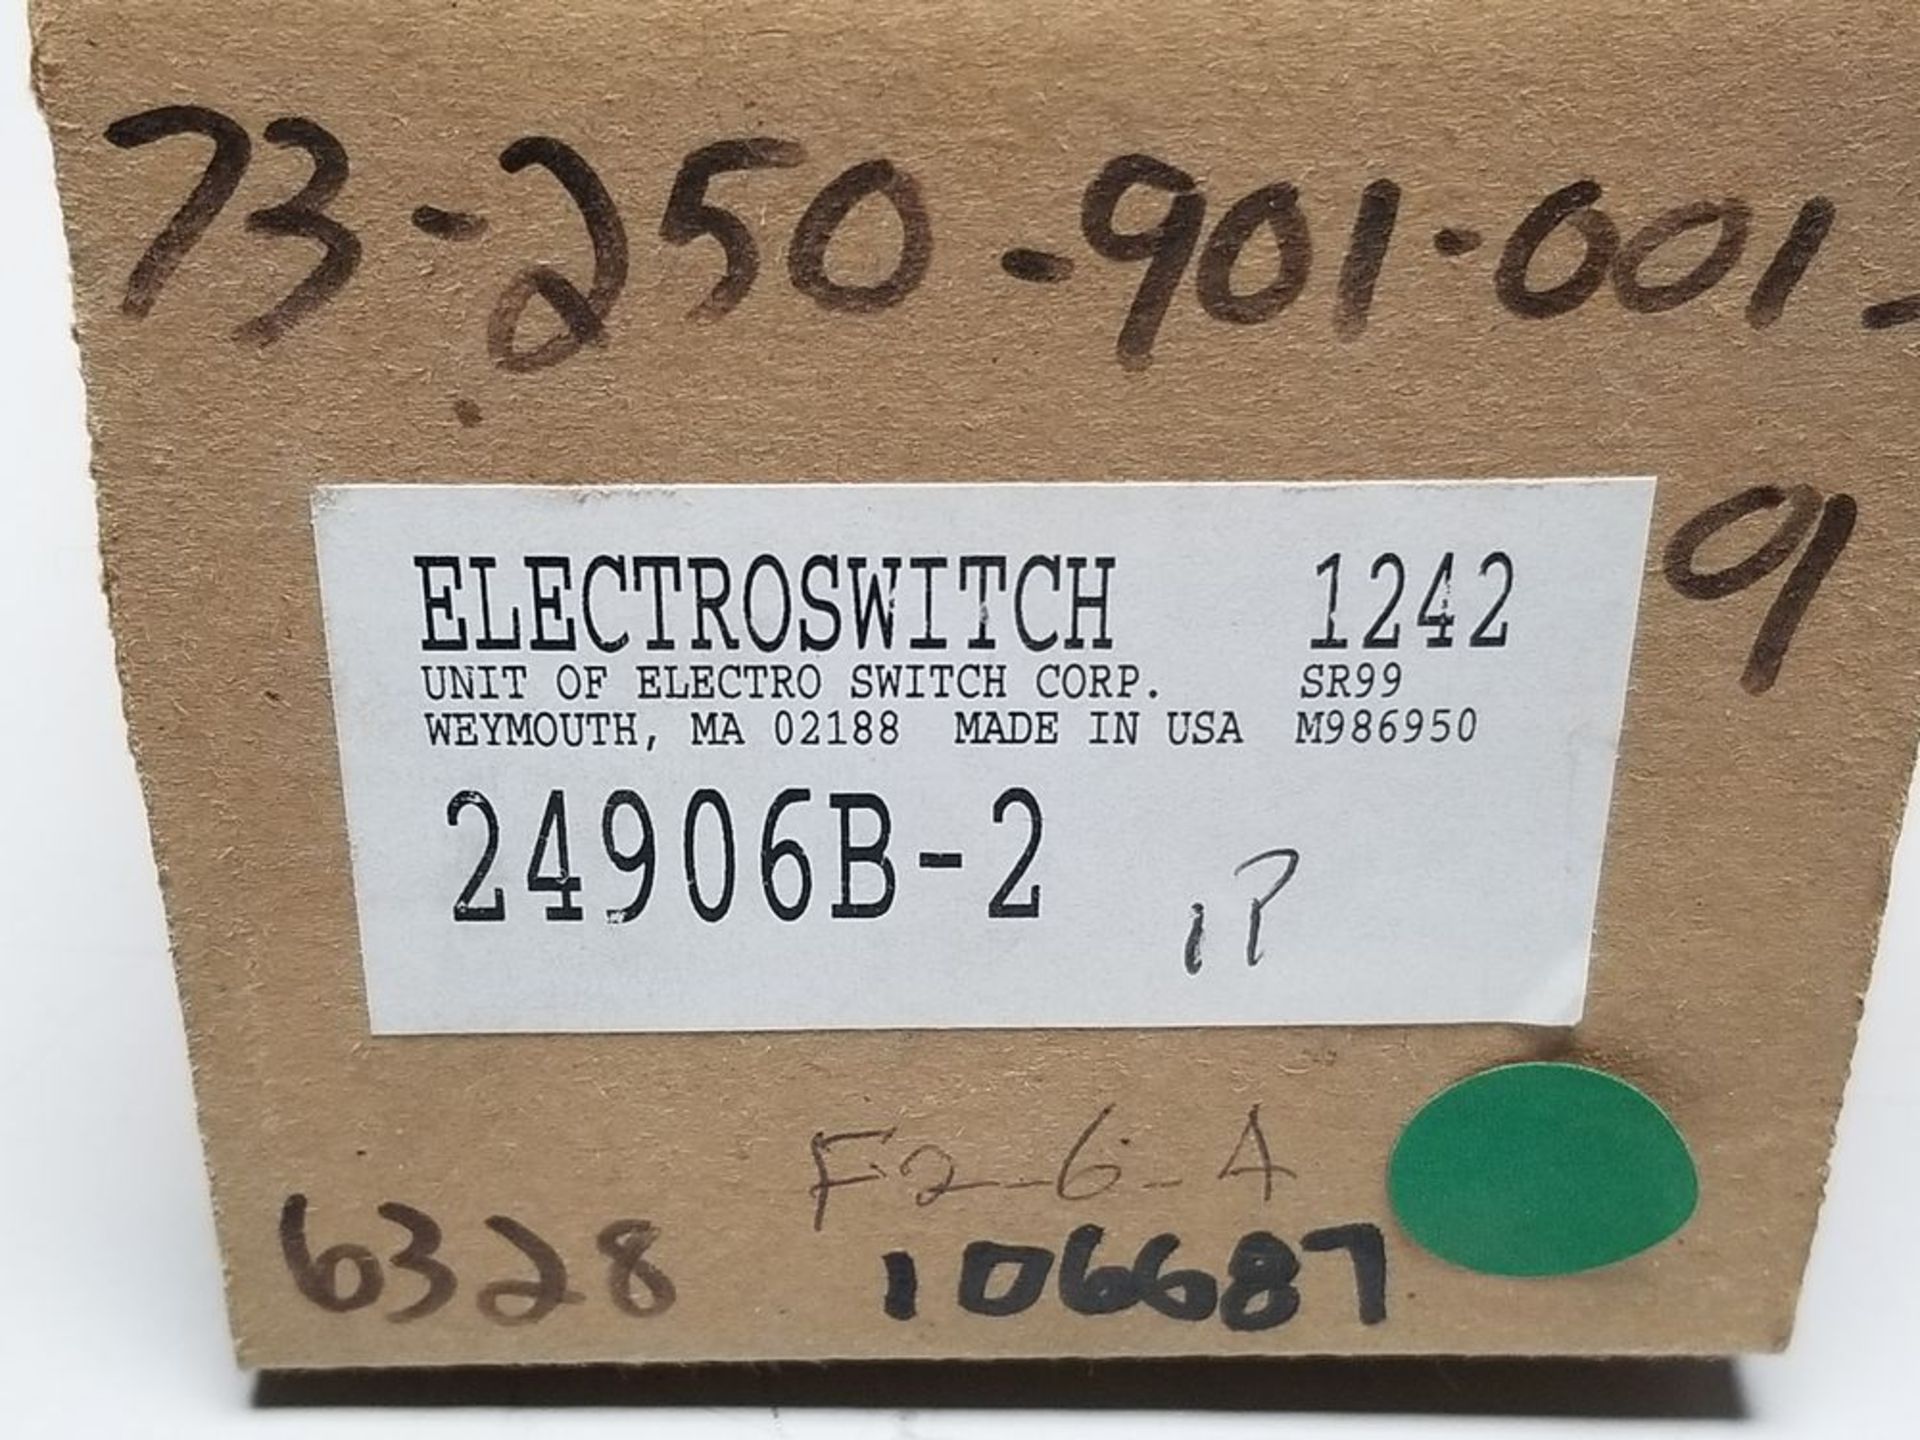 NEW ELECTROSWITCH SERIES 24 ROTARY CONTROL SWITCH - Image 2 of 8